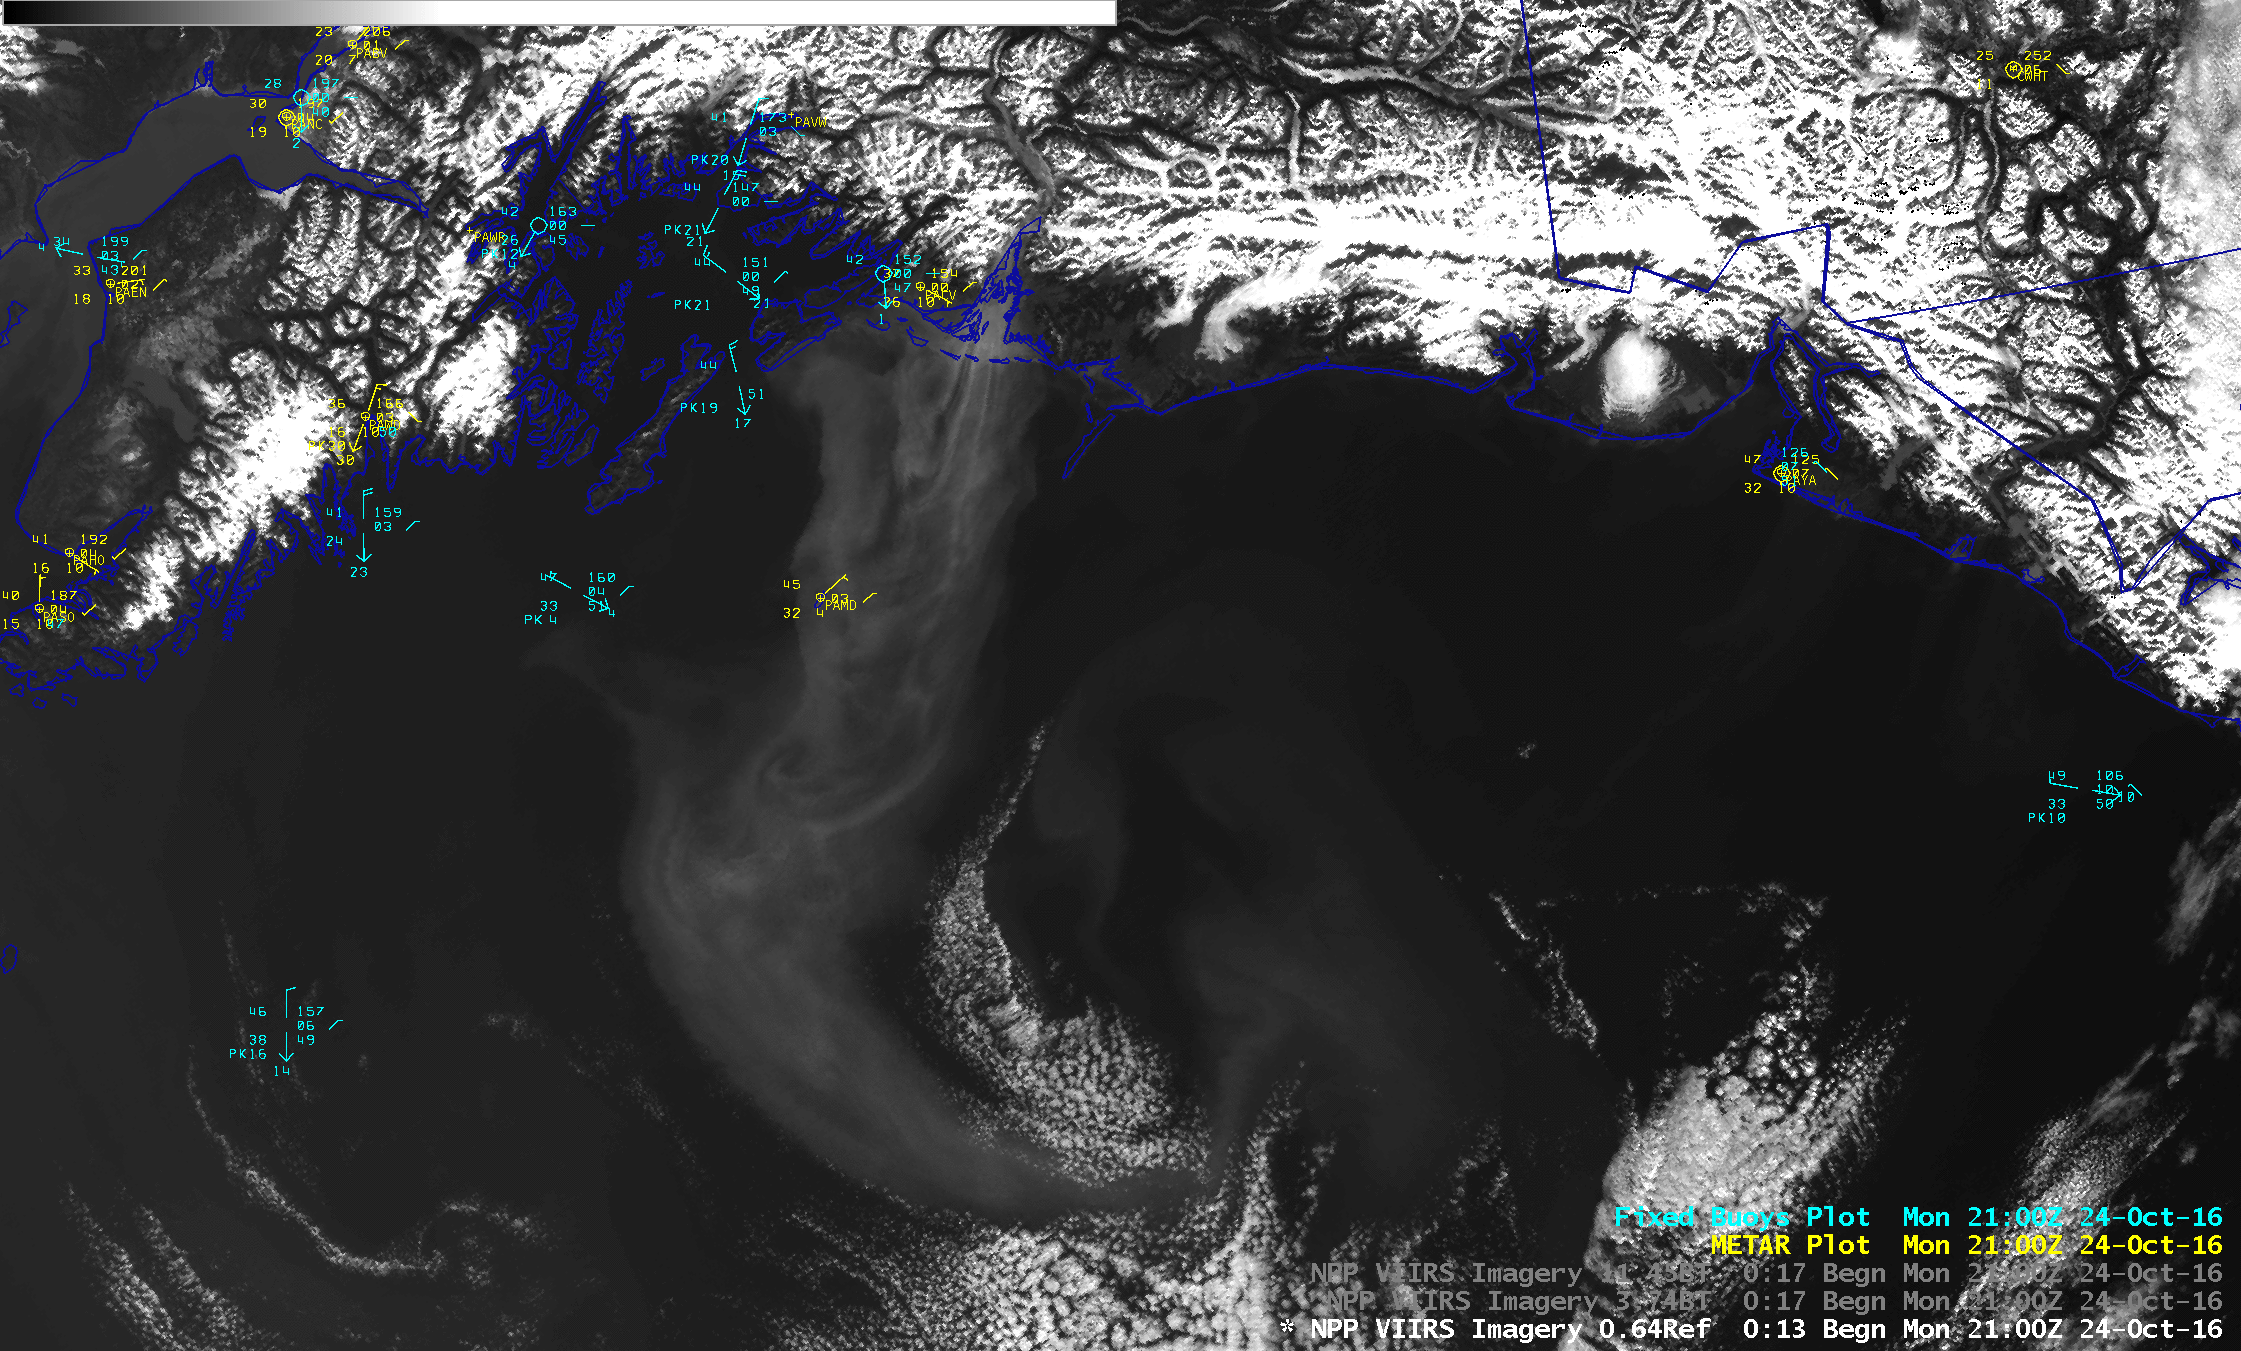 Suomi NPP VIIRS Visible (0.64 µm), Shortwave Infrared (3.74 µm) and Infrared Window (11.45 µm) images on 24 October 2016 [click to enlarge]